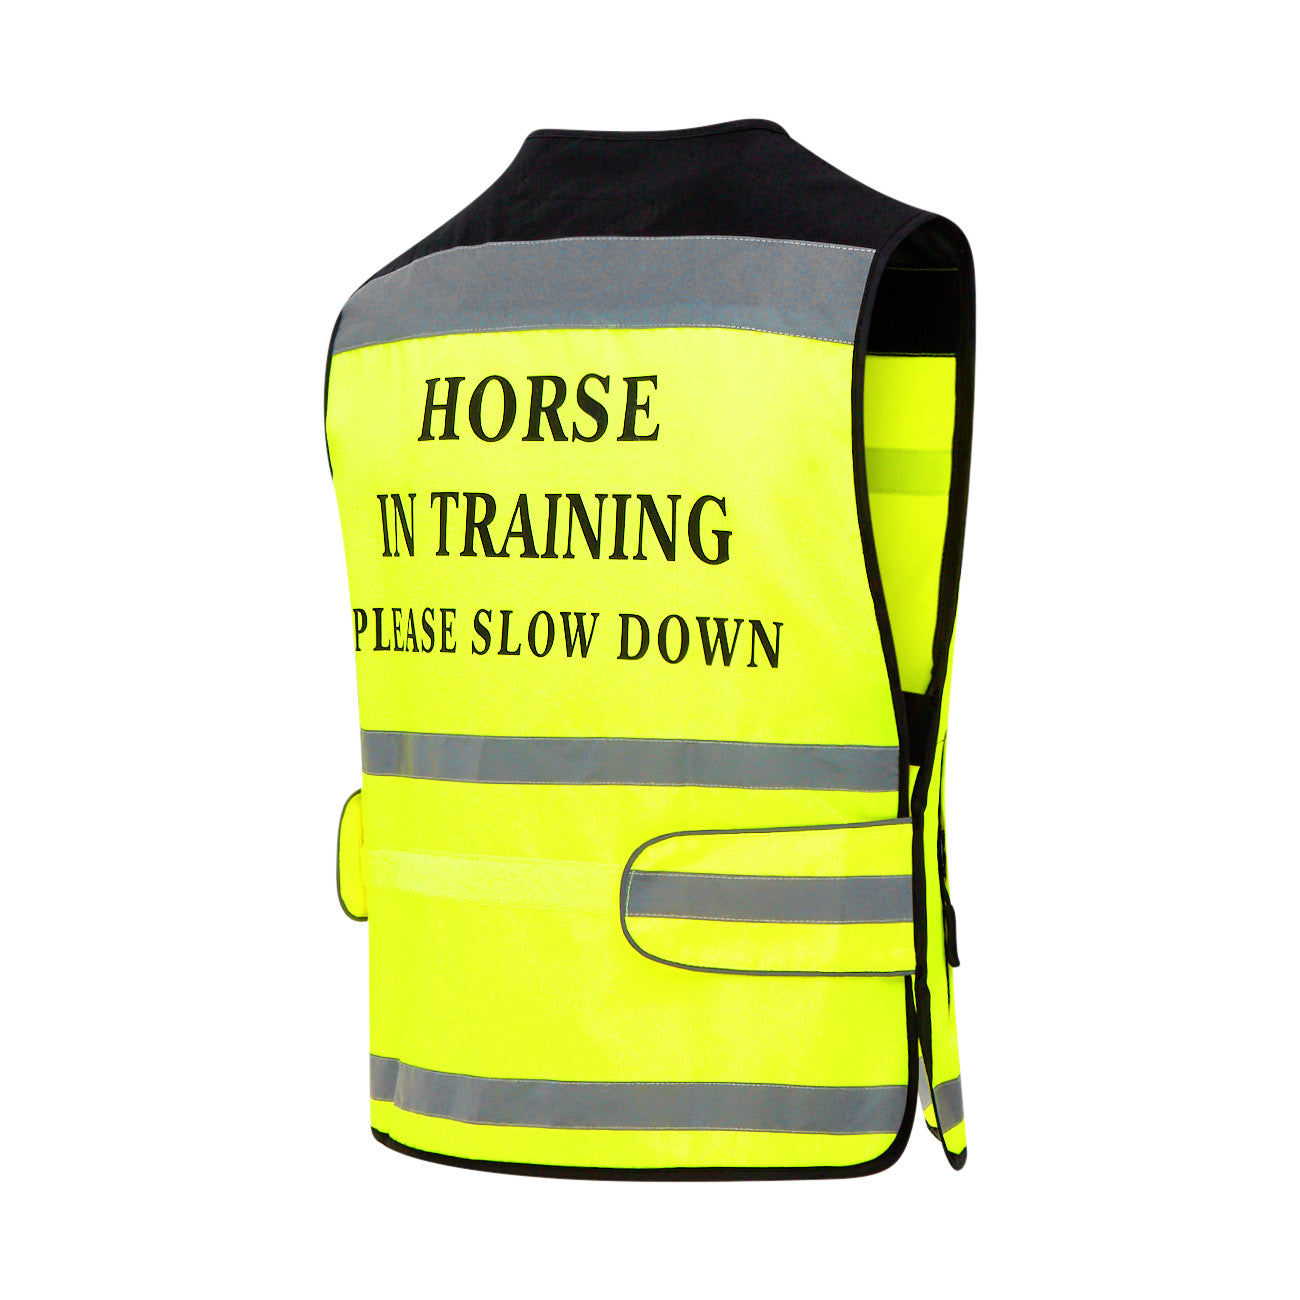 Equisafety Reflective Hi Vis Waistcoat Yellow - Horse In Training 